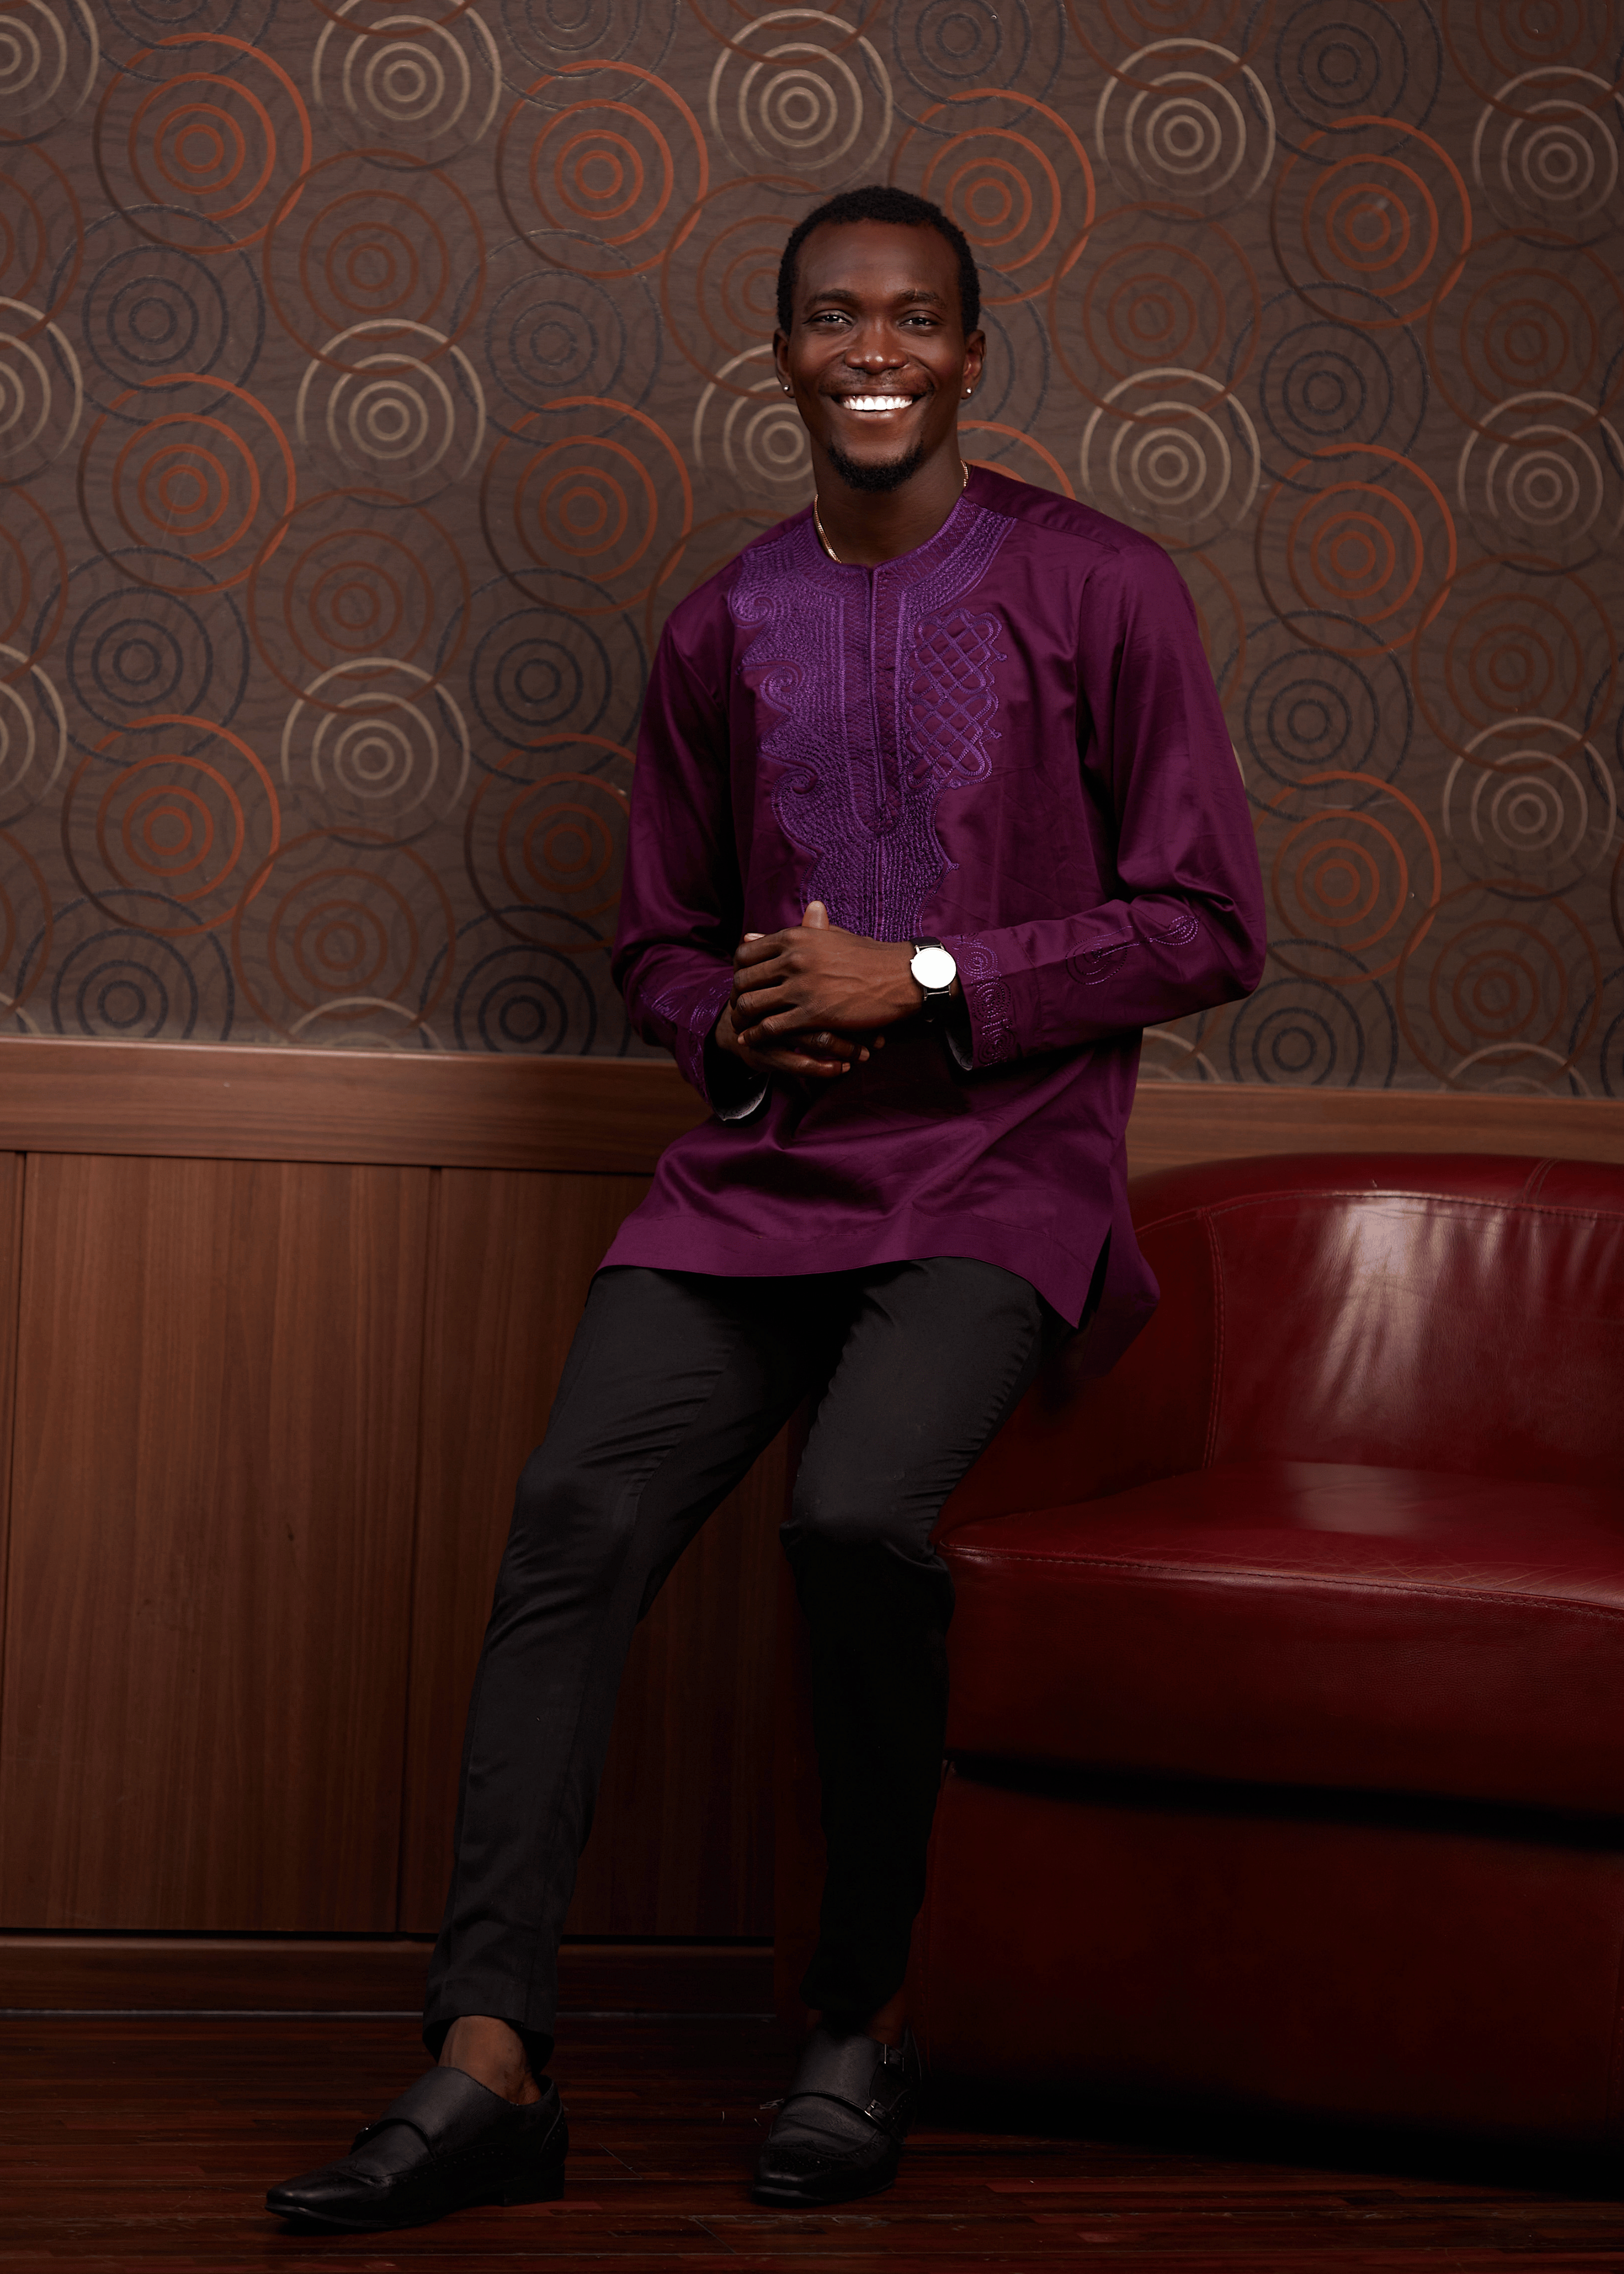 Oloye Embroidered Shirt (Navy)